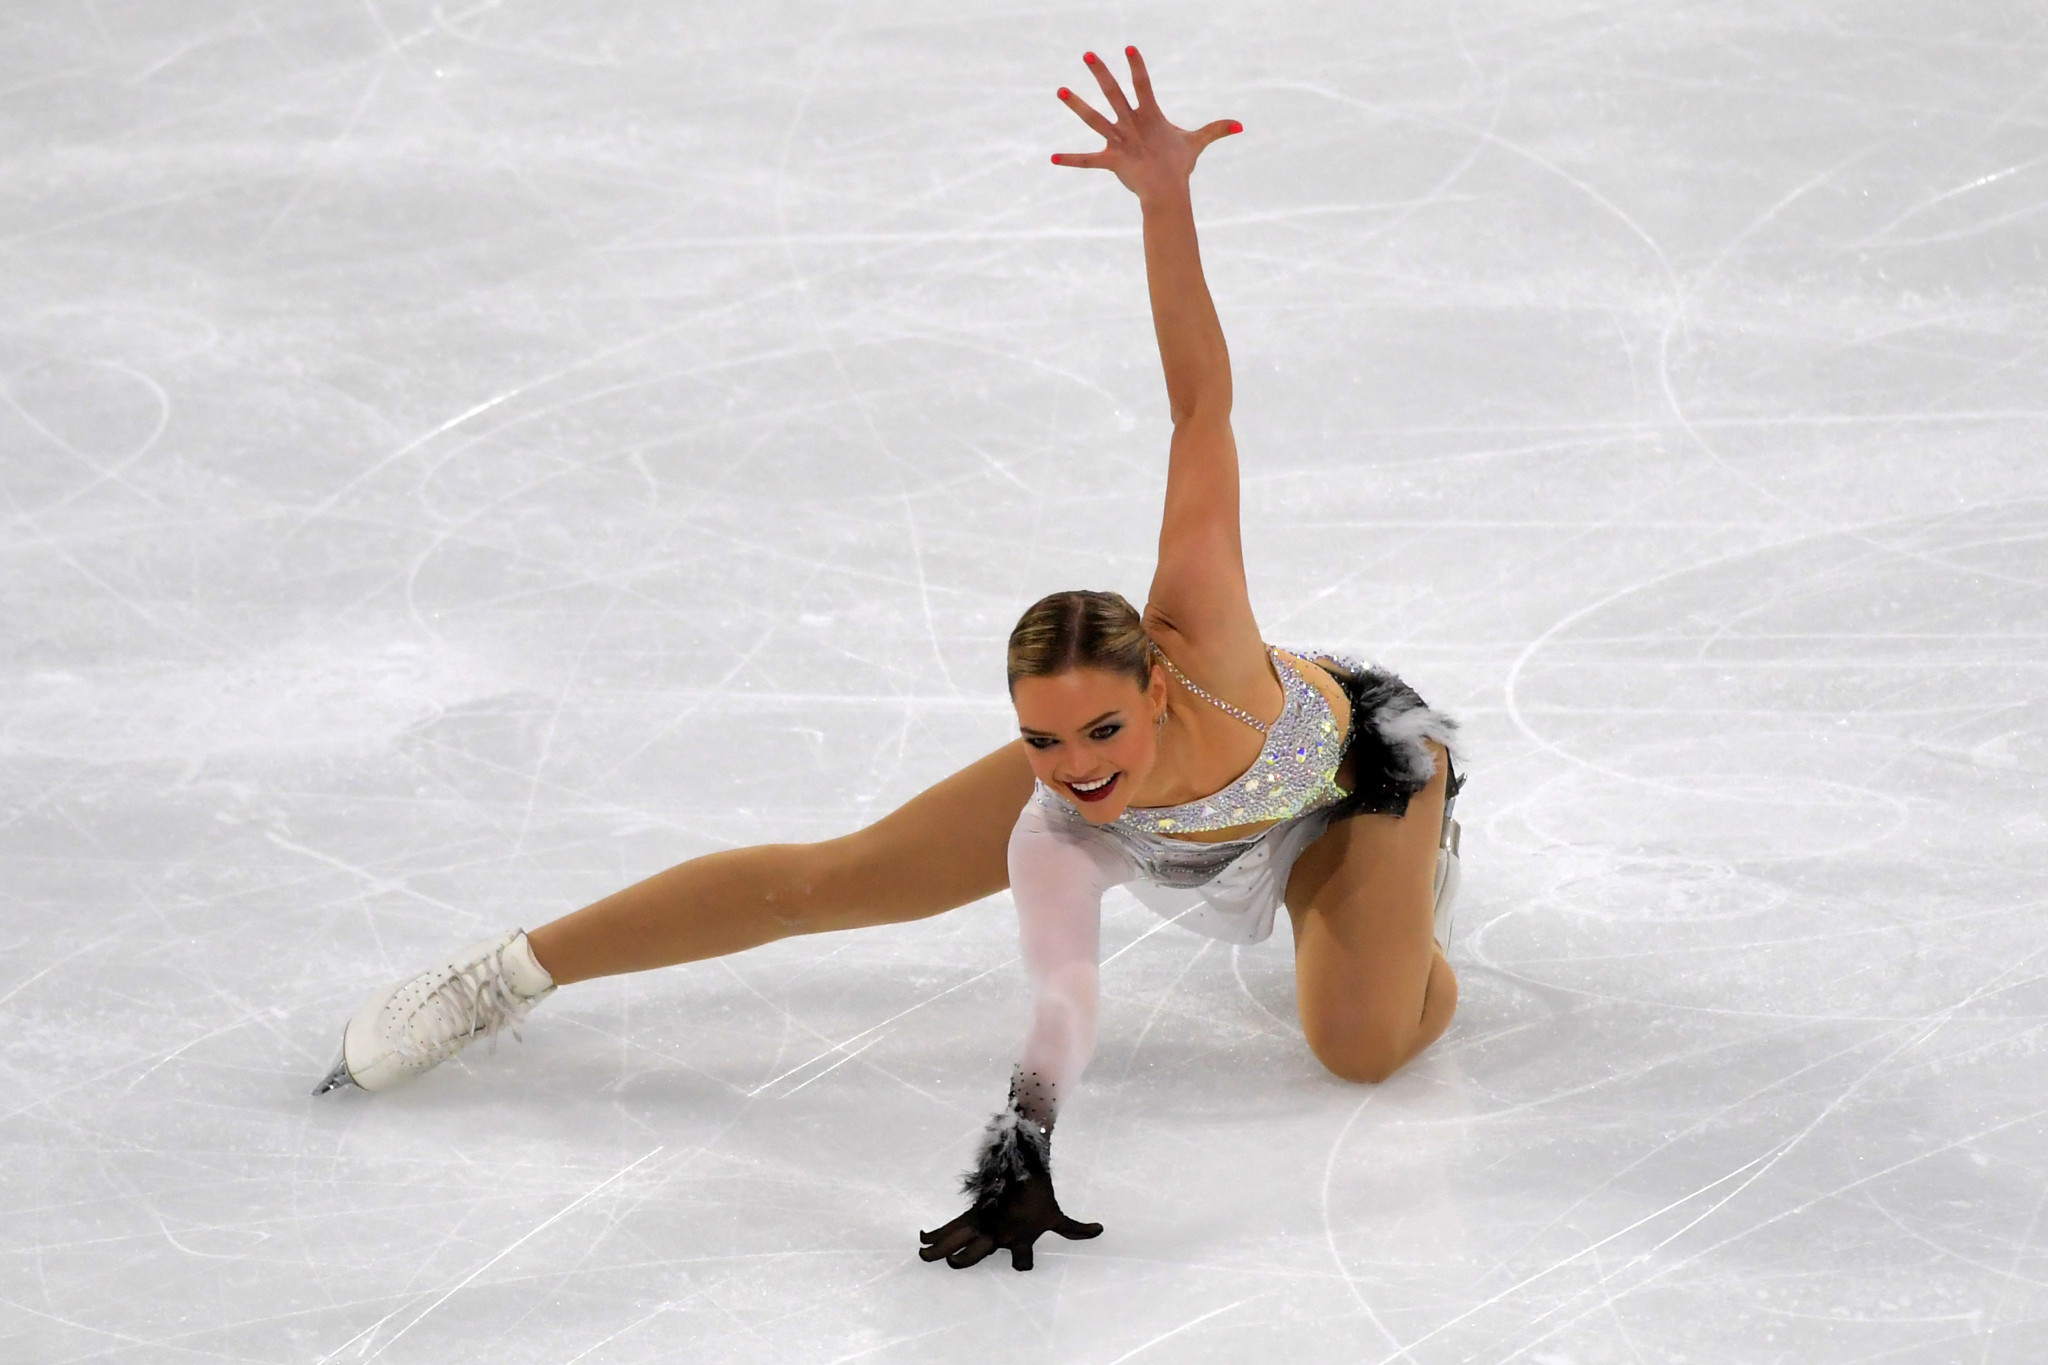 Belgium's Loena Hendrickx is among the stars featuring at the European Figure Skating Championships with the absence of Russia ©Getty Images